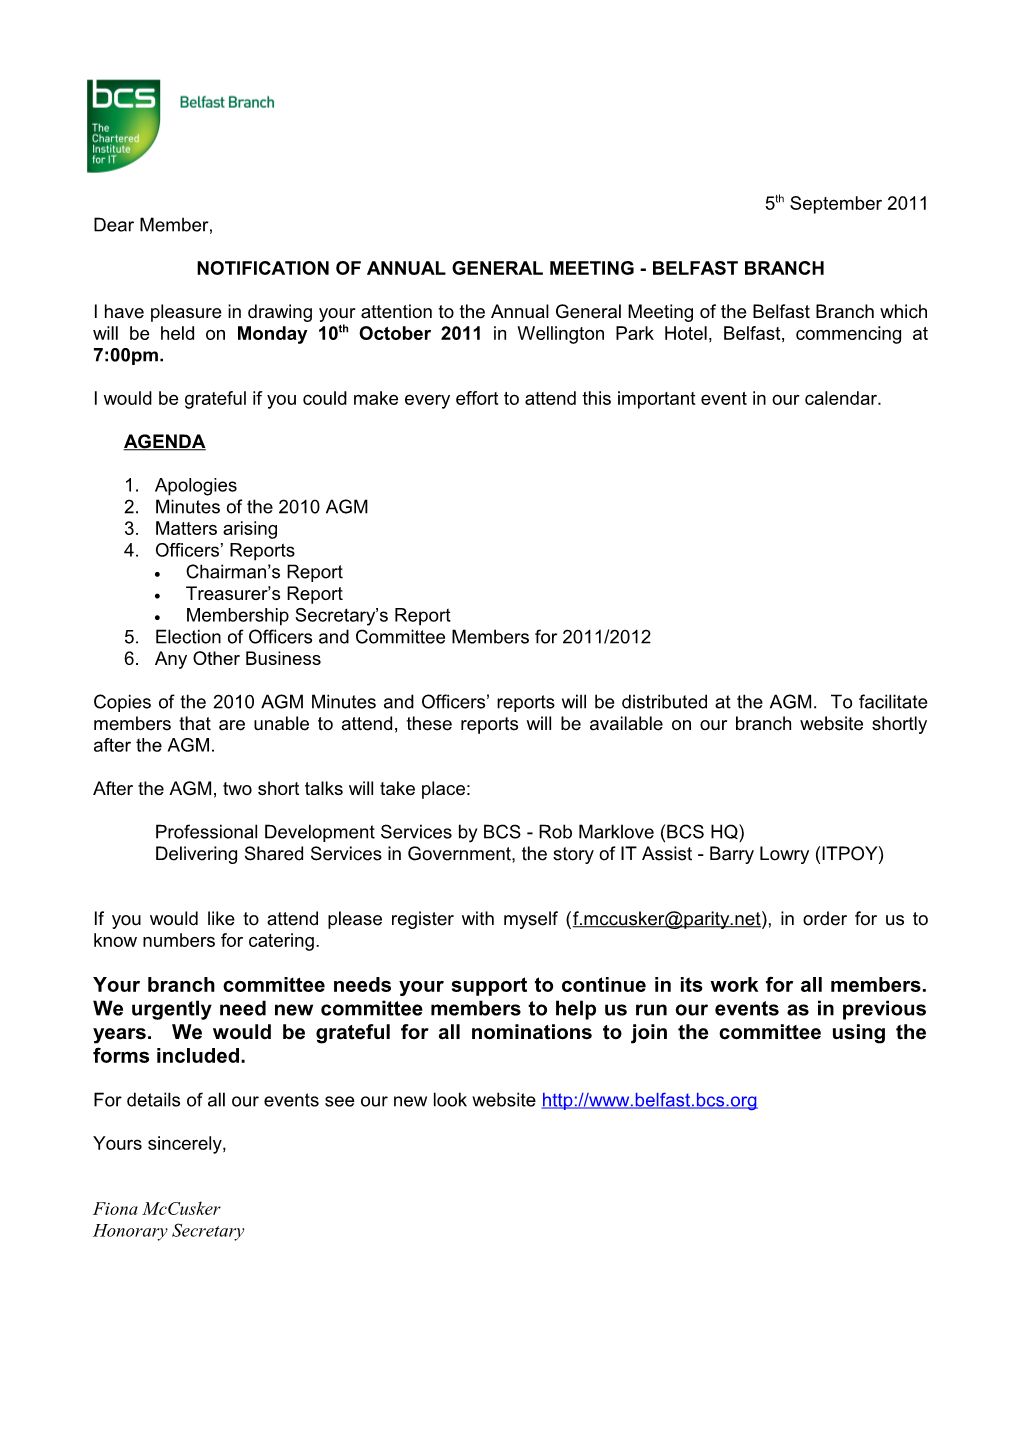 Notification of Annual General Meeting - Belfast Branch